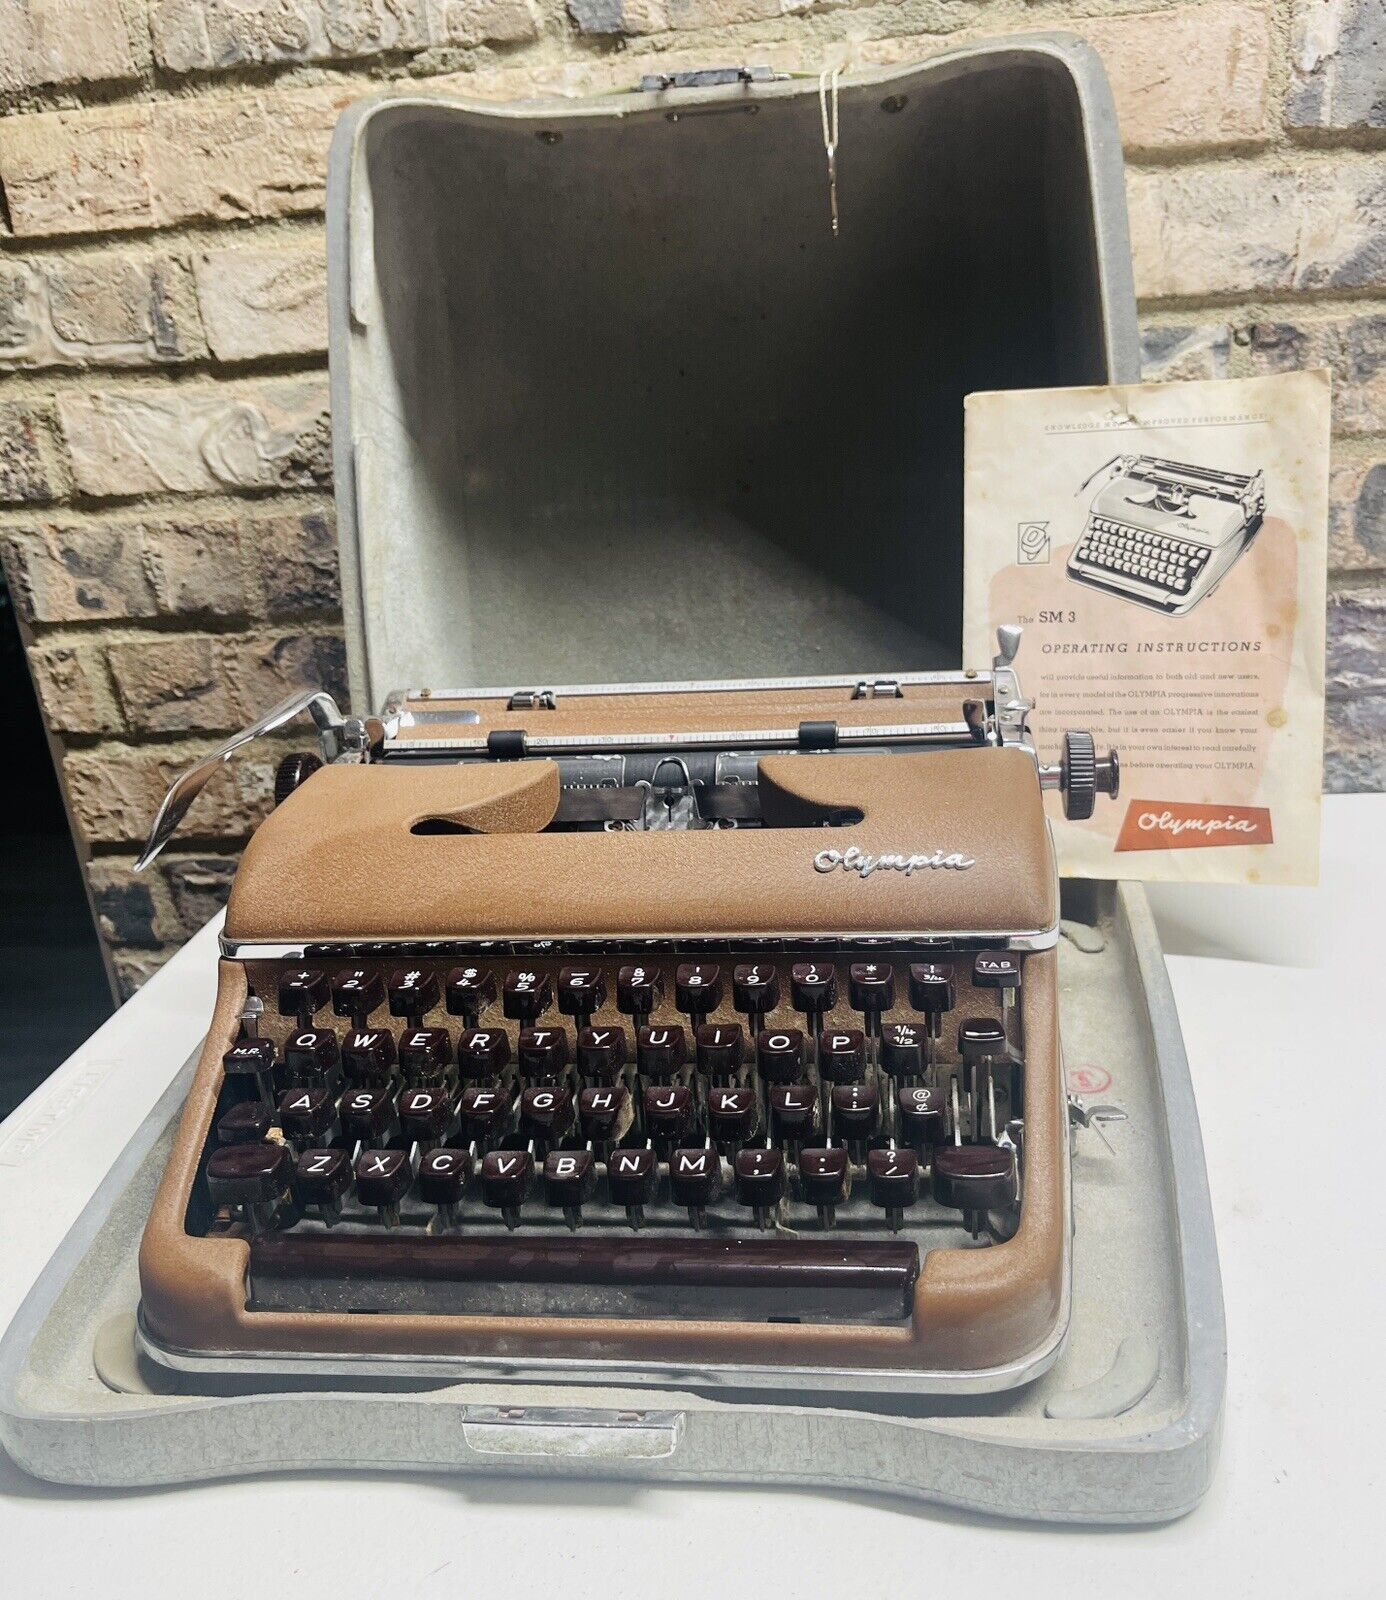 1958 Olympia SM3 Typewriter W/Case+Ribbon - Not Currently Working But Repairable